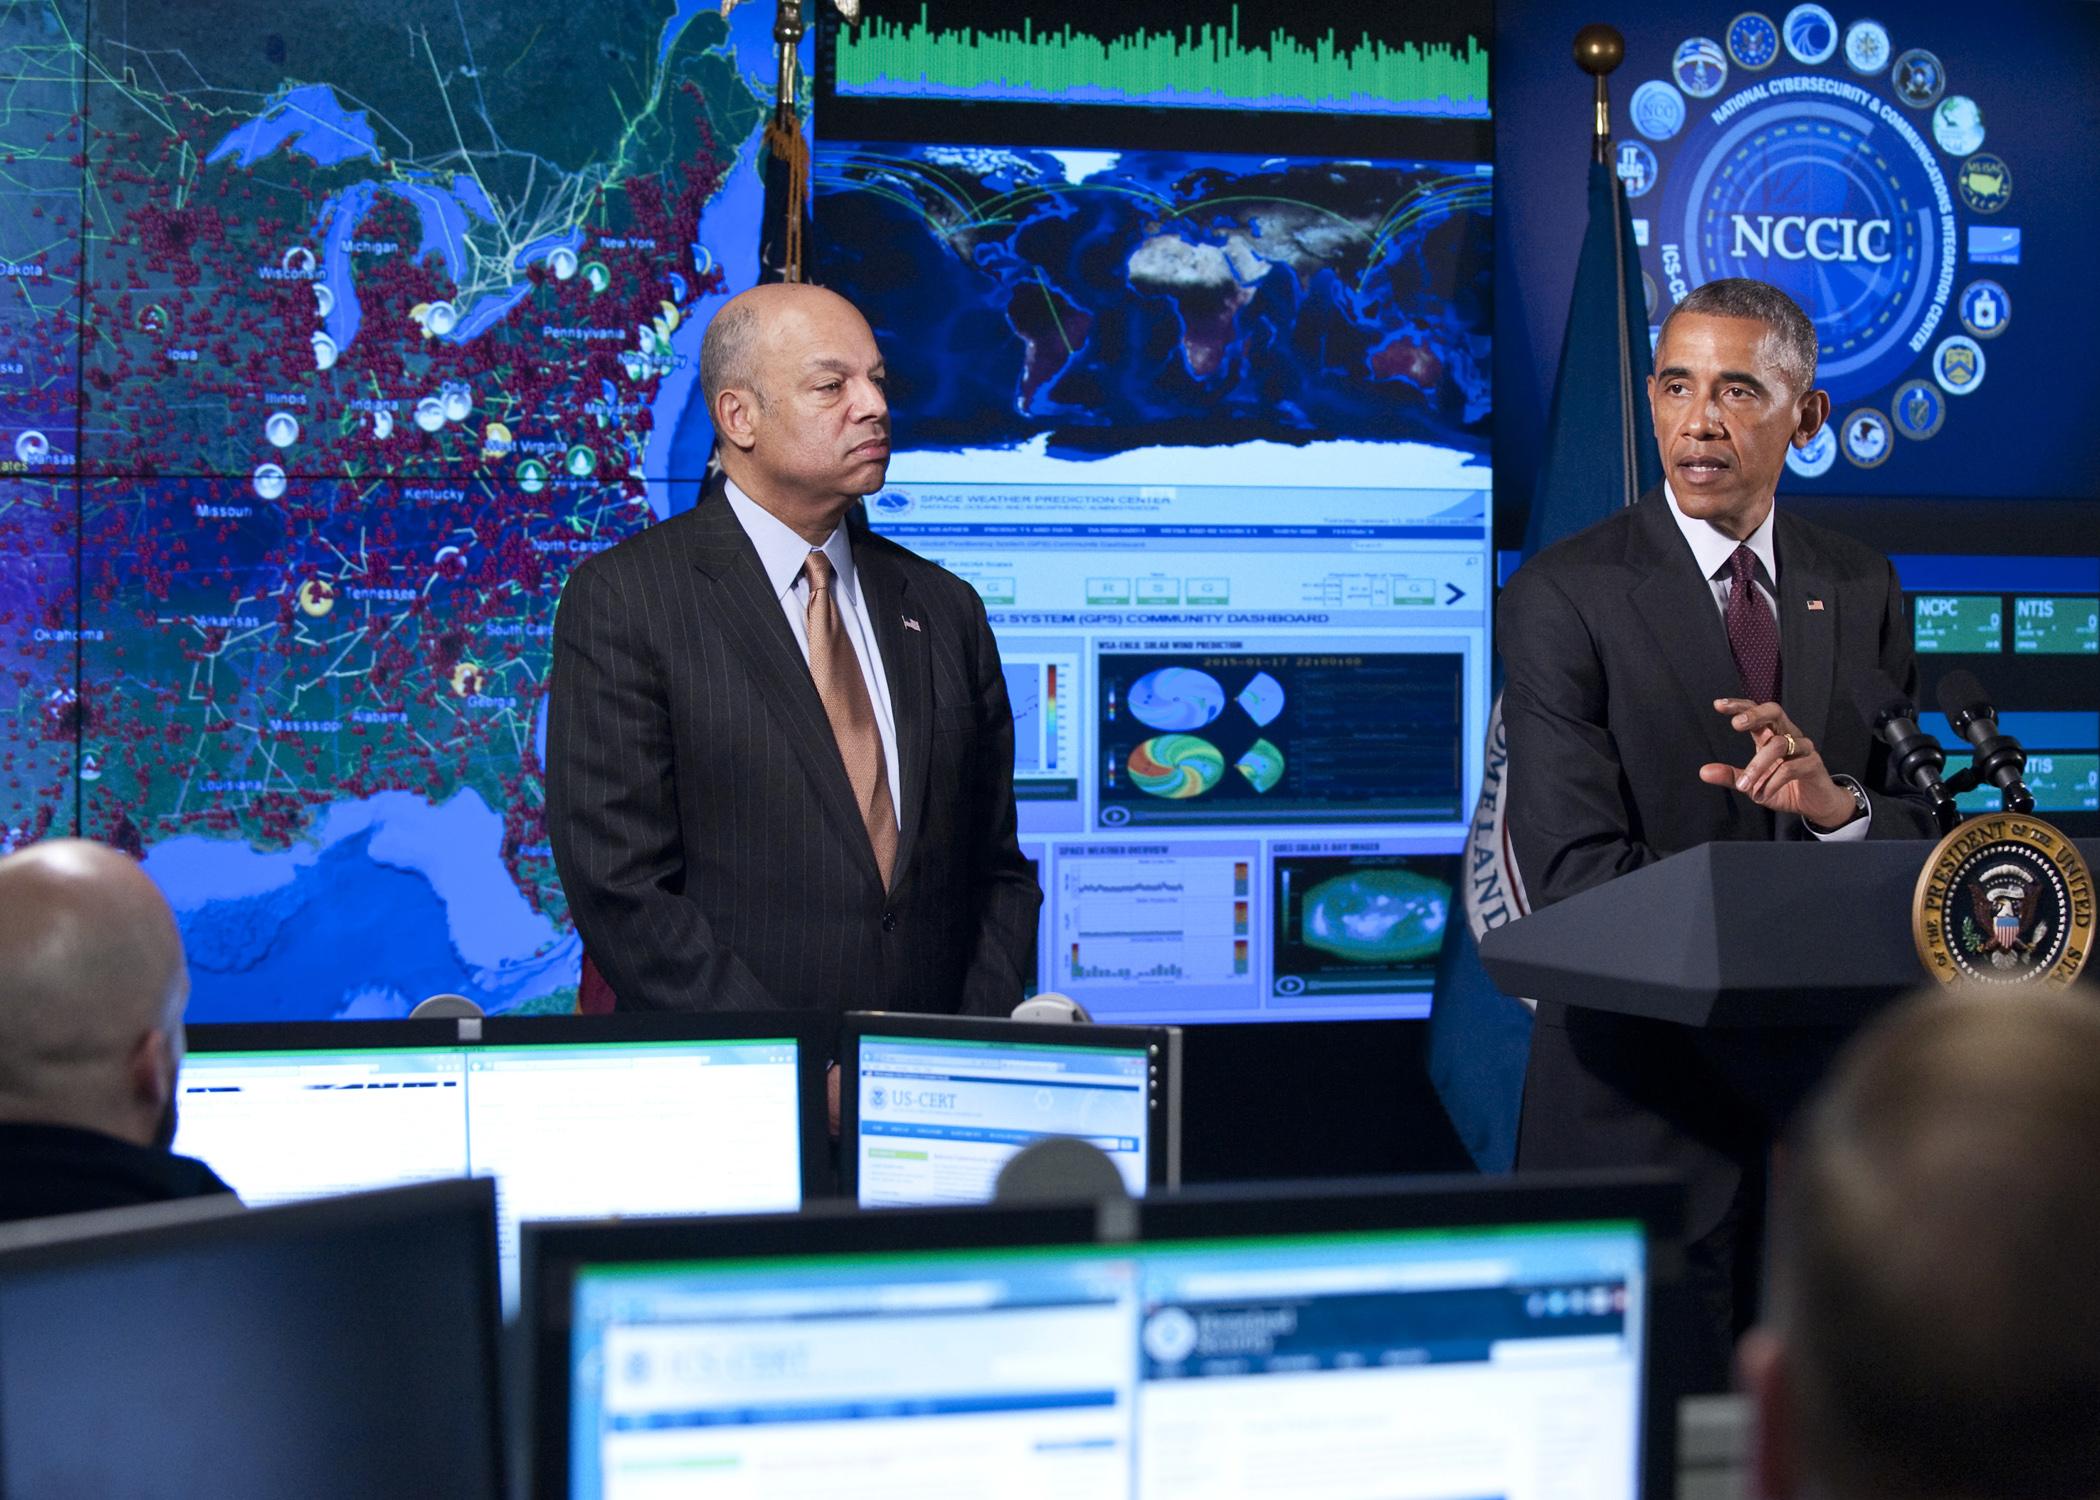 The Department of Homeland Security's National Cybersecurity and Communications Integration Center opened in 2009 to help DHS monitor cyber threats across government agencies. (DHS)